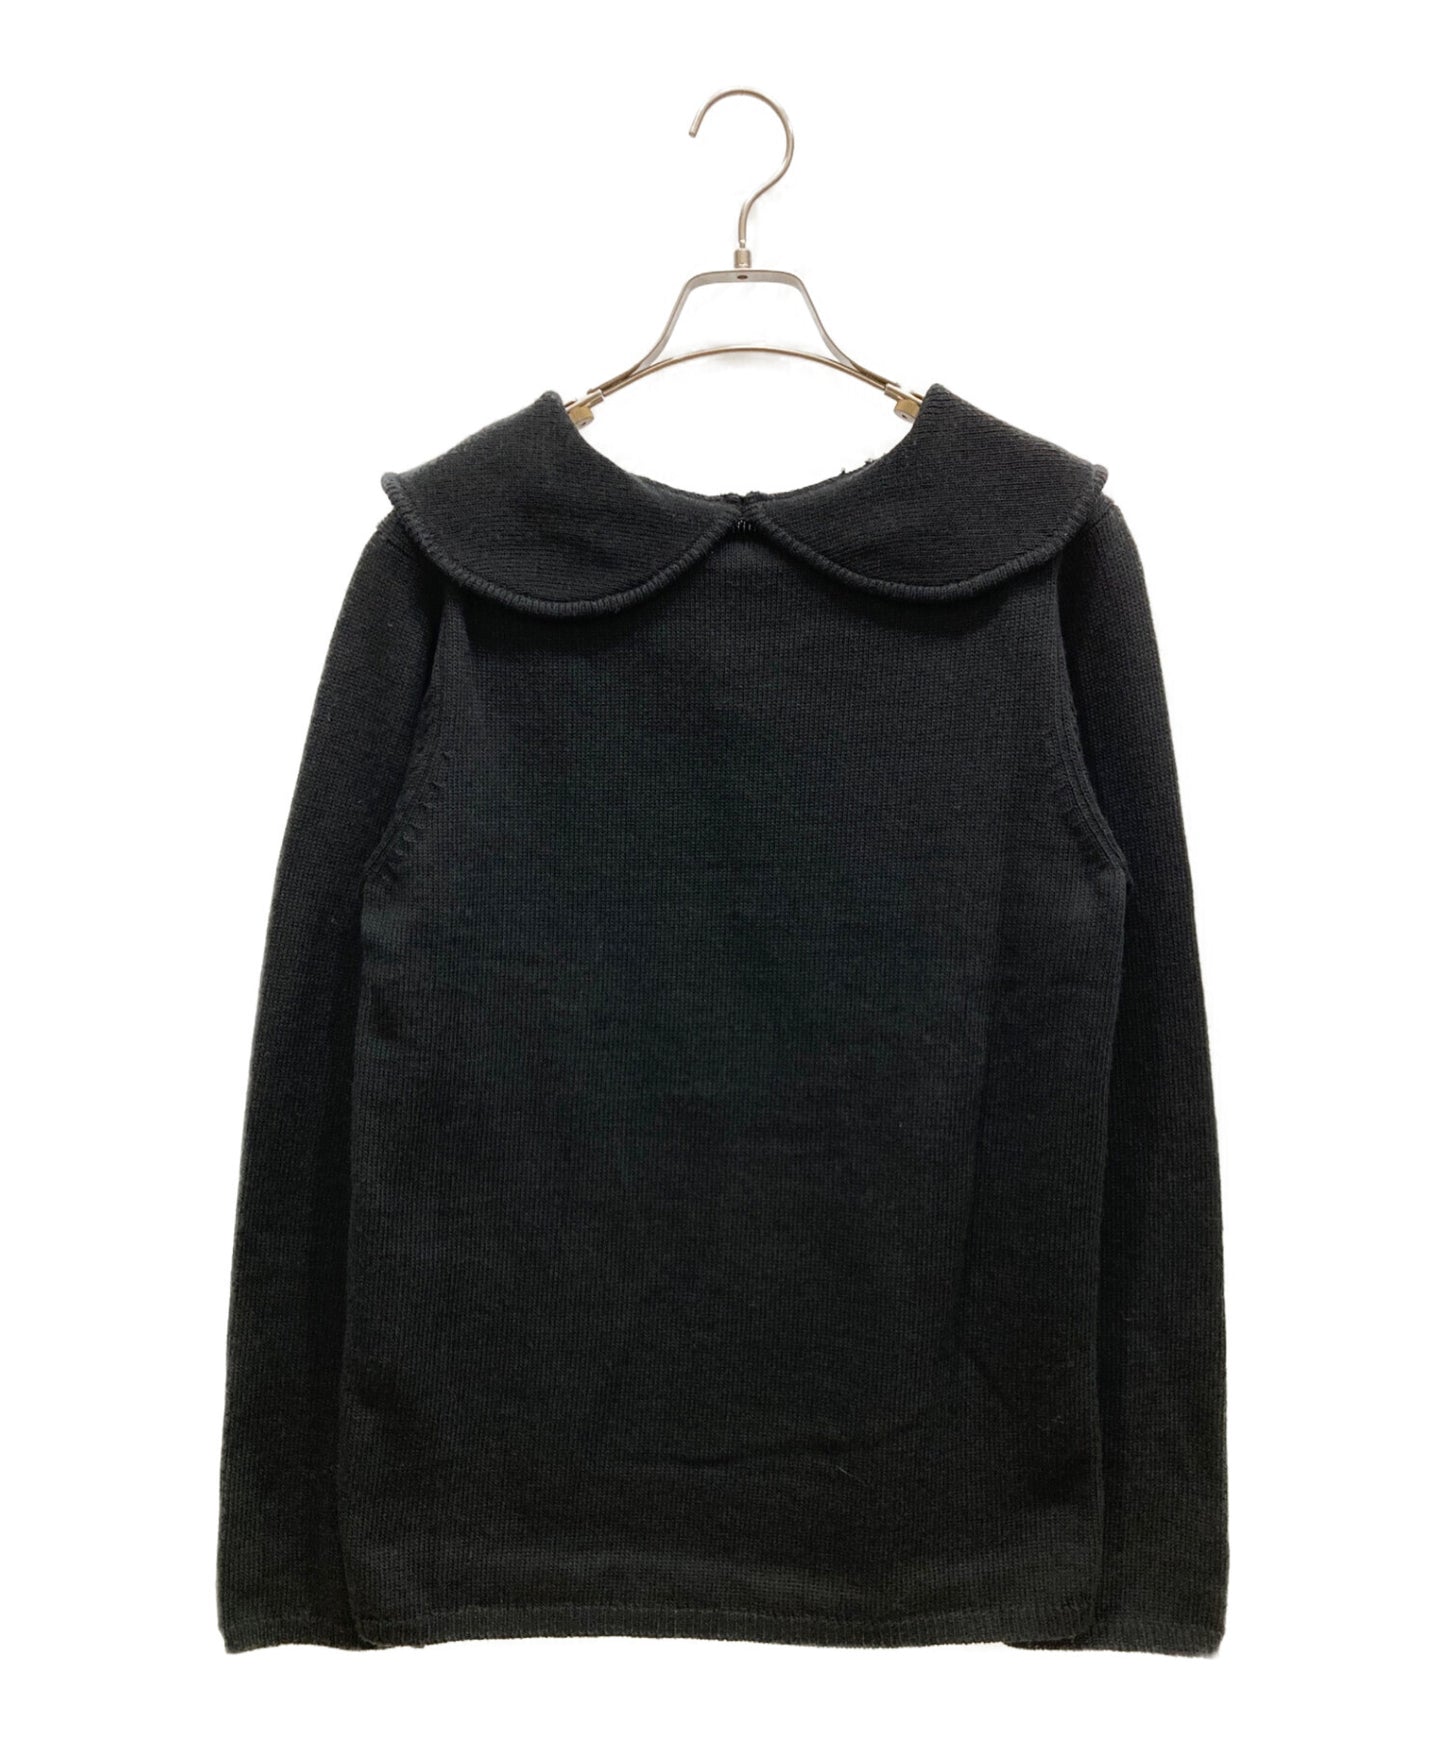 [Pre-owned] COMME des GARCONS COMME des GARCONS Peter Pan Collar Sweater AD2022 RJ-N507 / AD2022 / 22AW